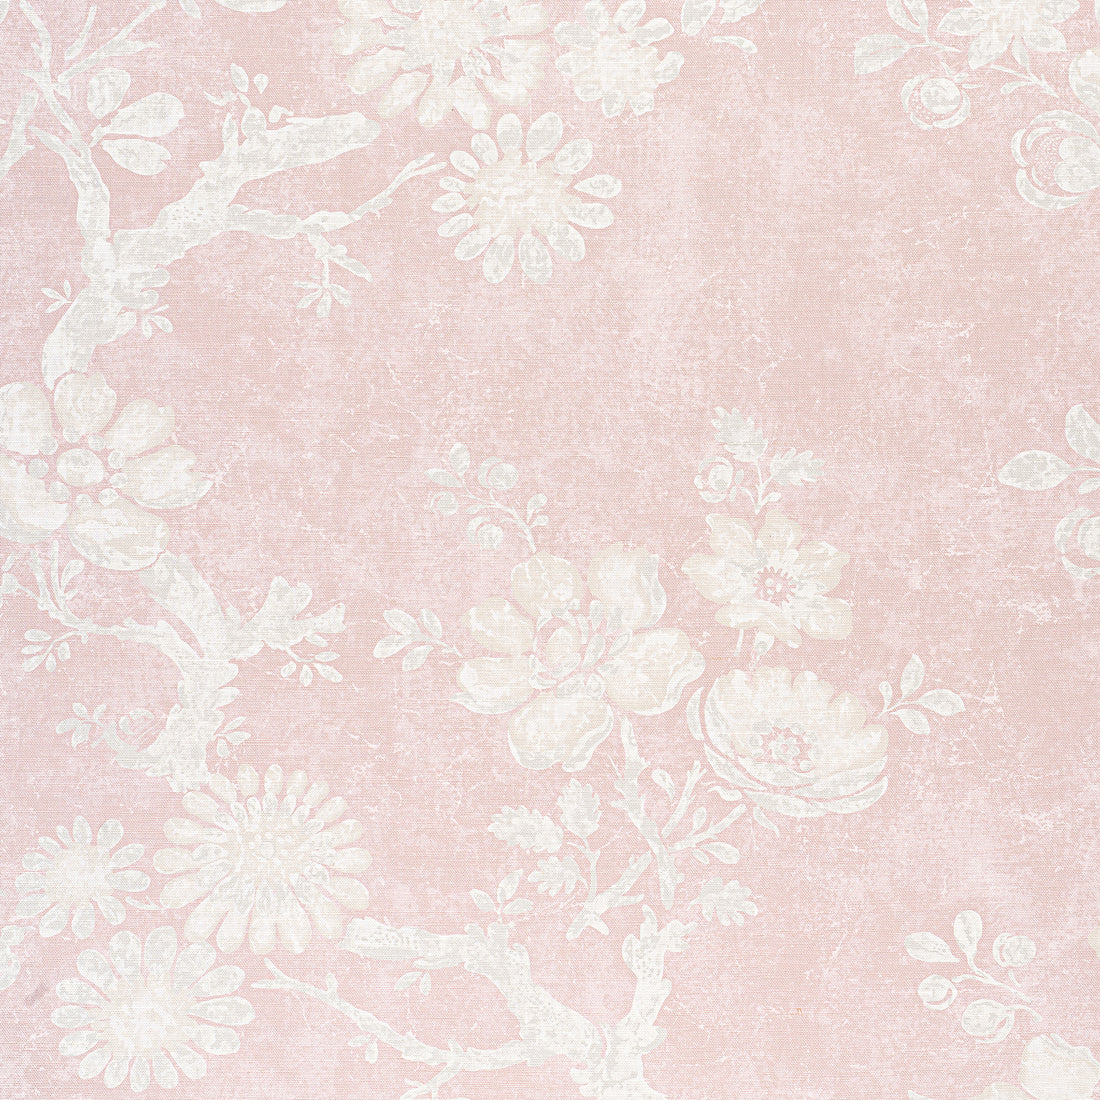 Claudette fabric in blush color - pattern number F910816 - by Thibaut in the Heritage collection